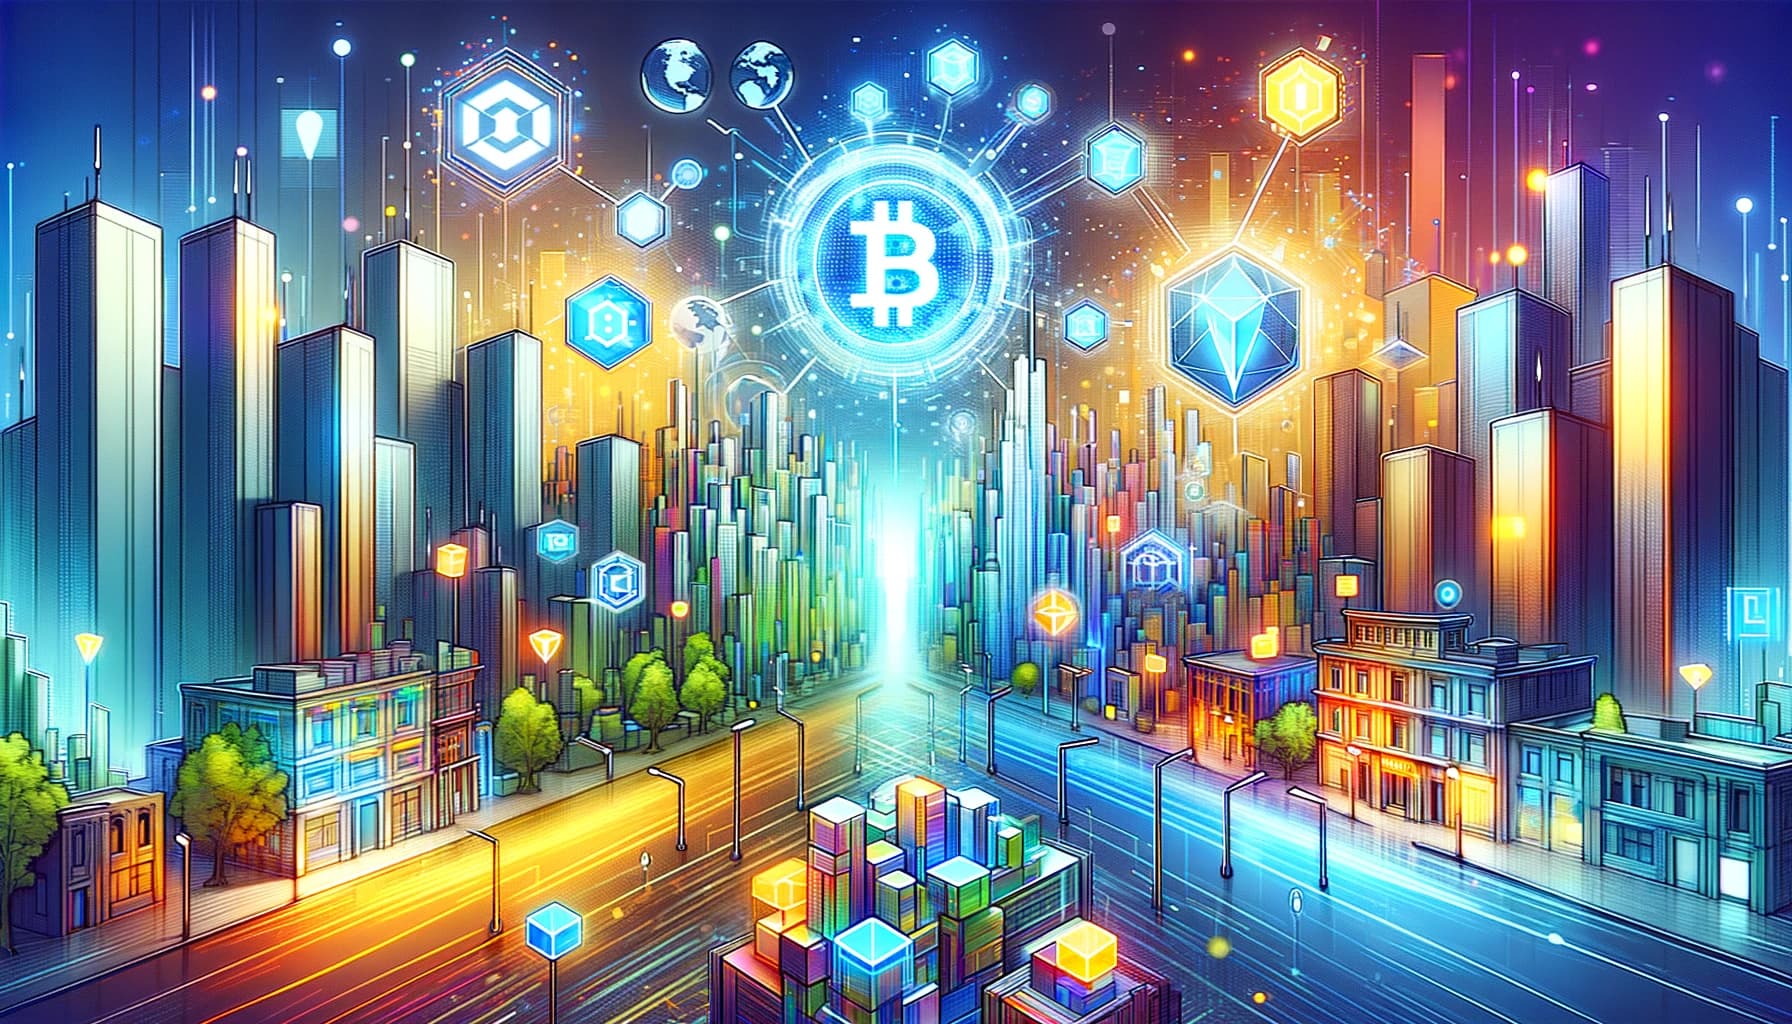 Bucket Technologies image showing a view of two roads coming to a point right at the center of a metro area with a Bitcoin logo encircled in blue floats just above head.